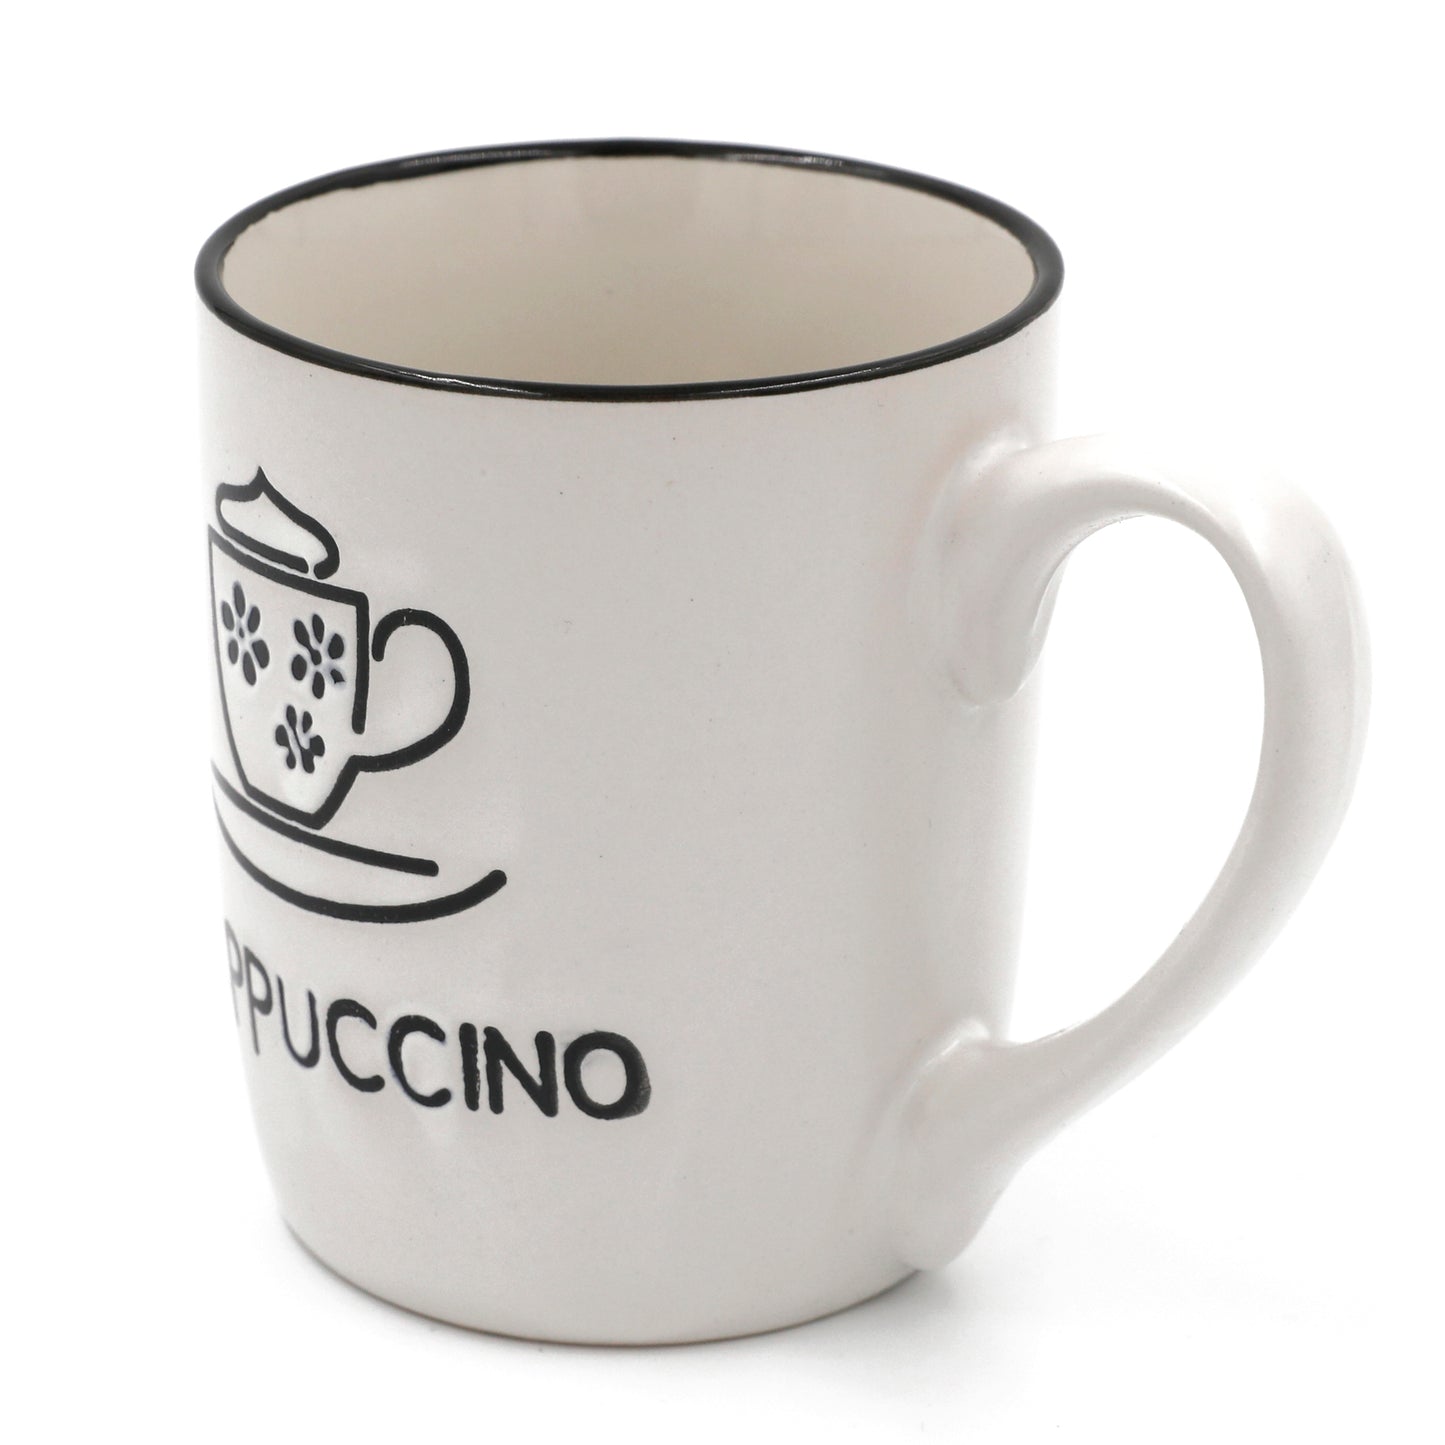 13 oz White Vintage Stoneware Coffee Mugs With Quotes,"Cappuccino"